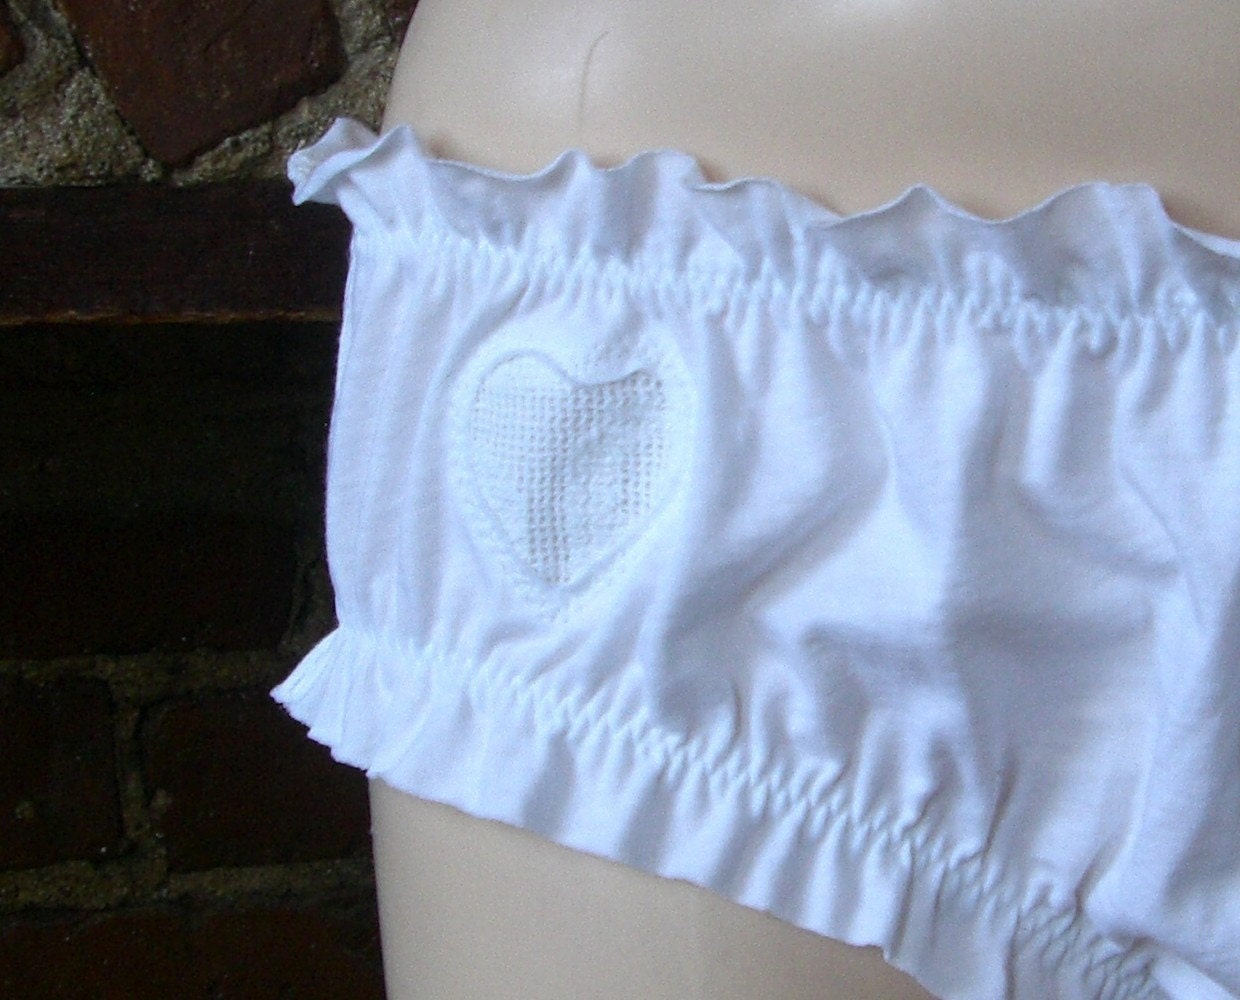 Victorian White Heart Knickers - small, medium, large, xl